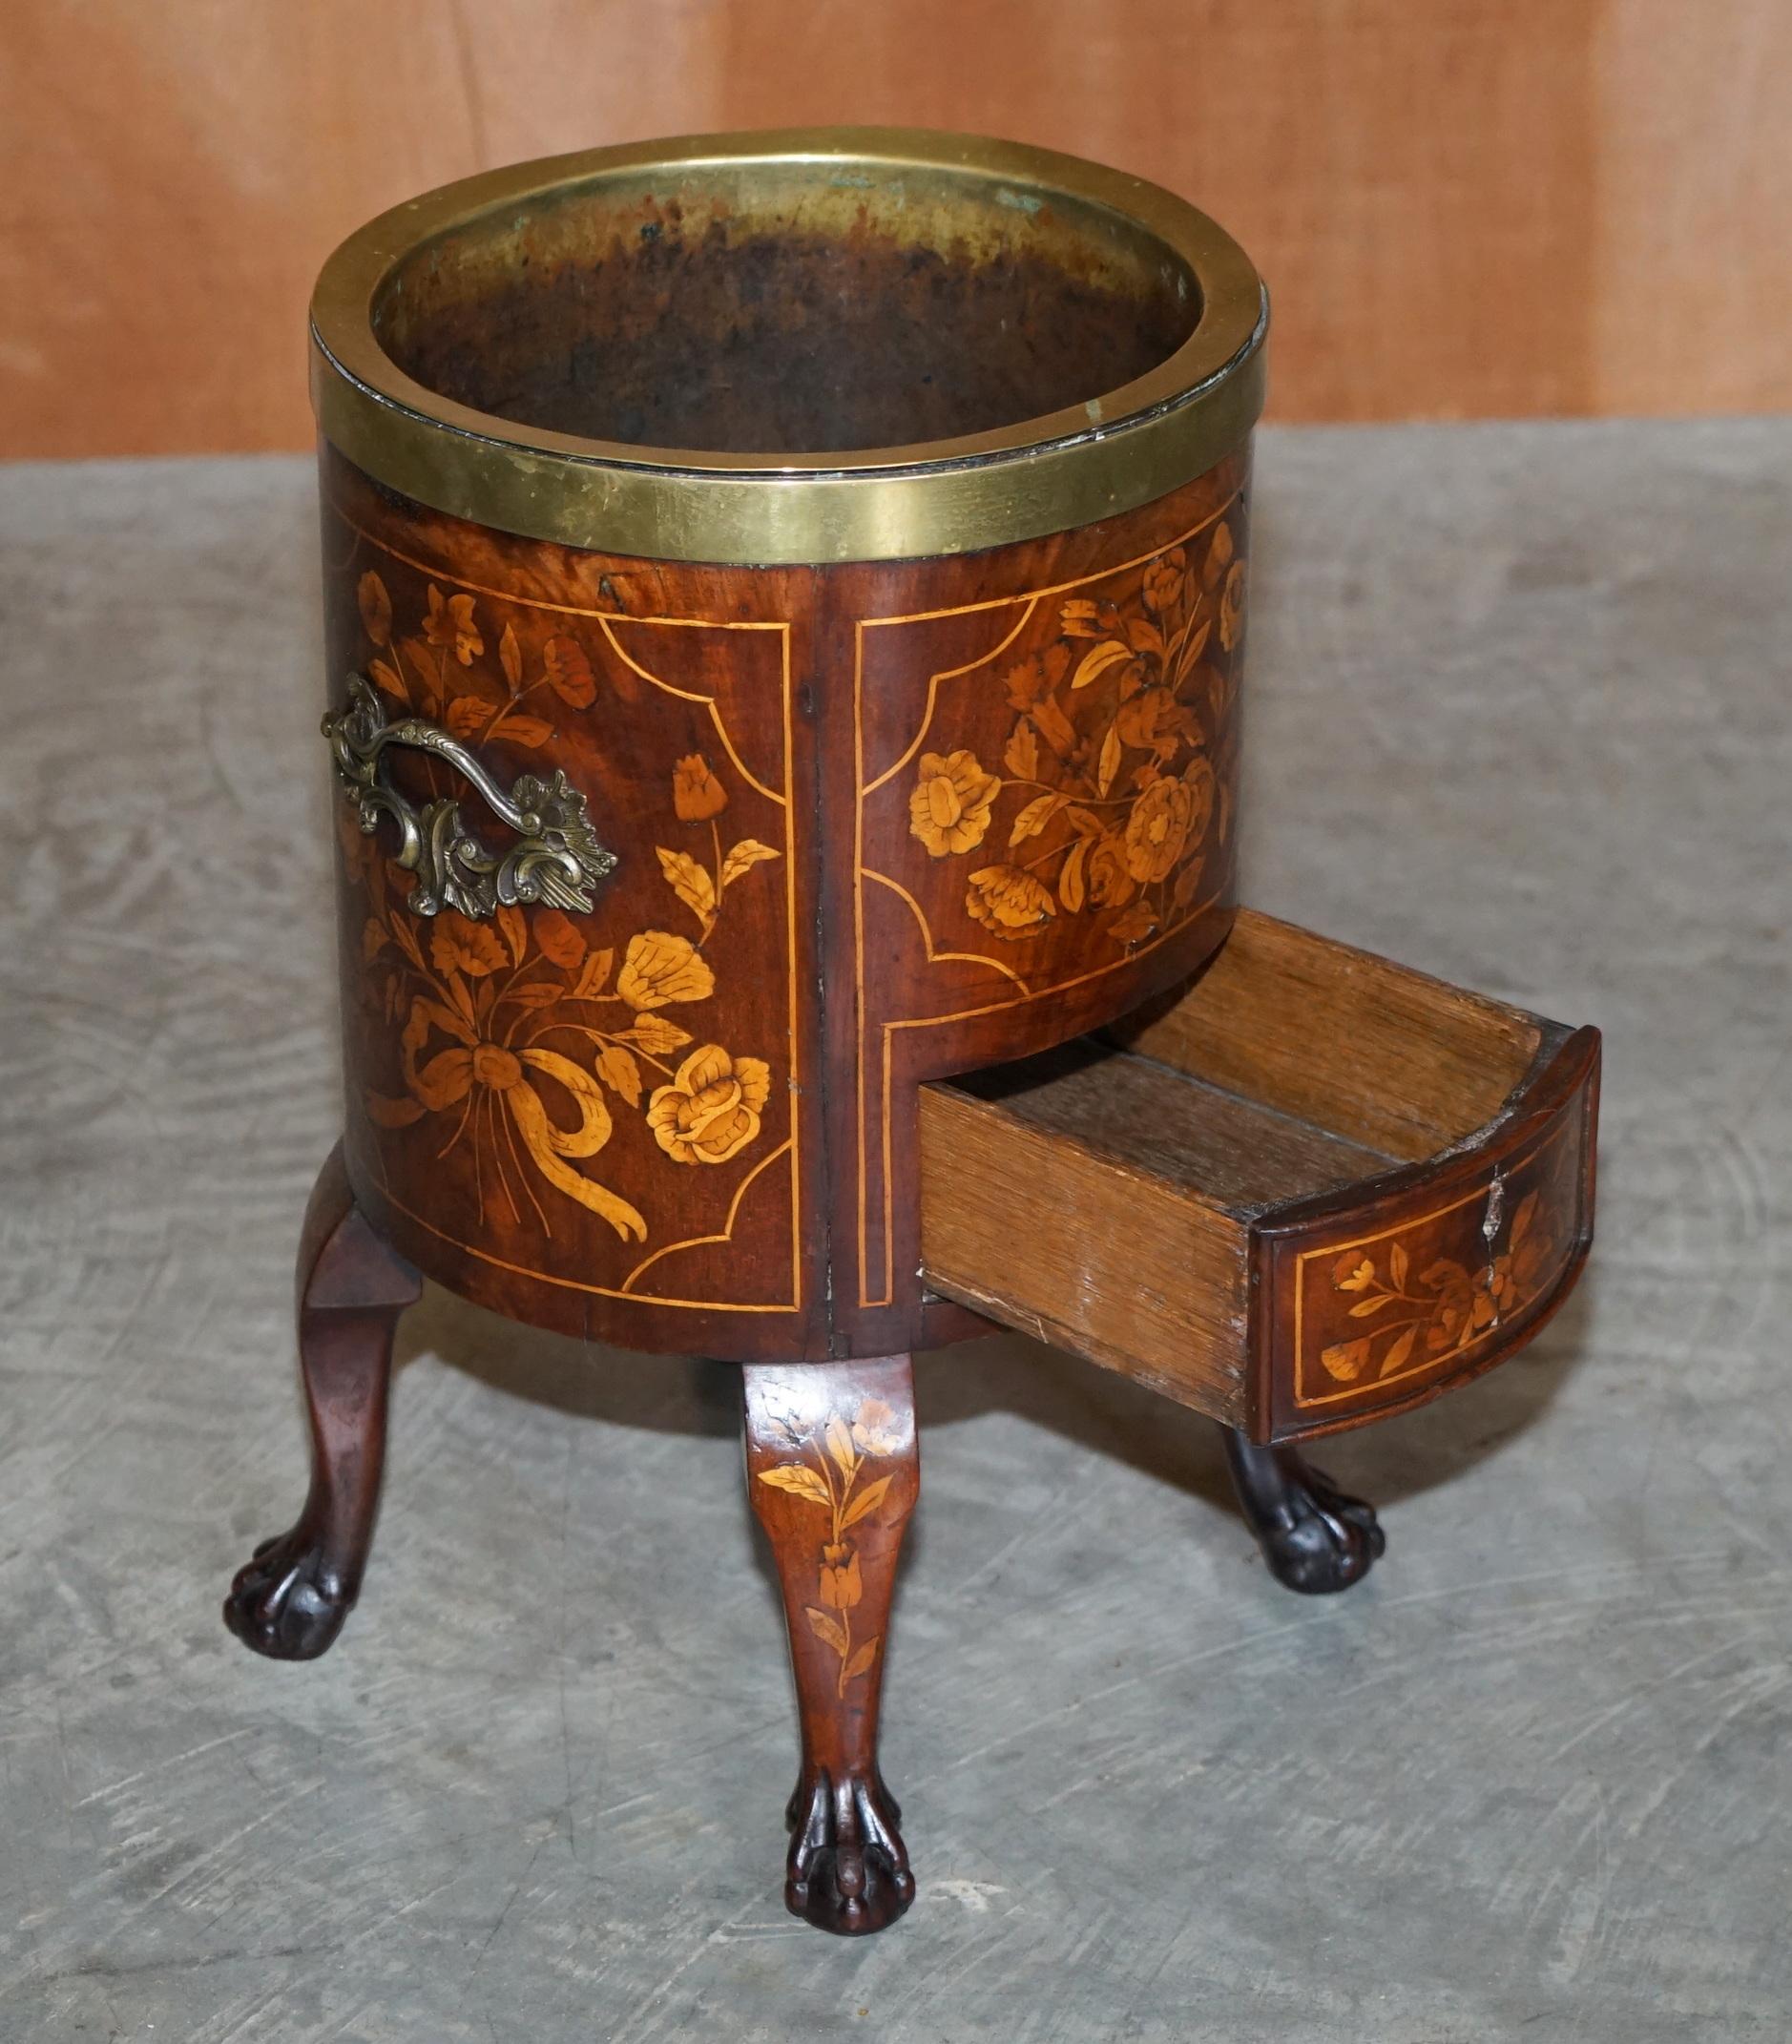 Exquisite Antique circa 1800 Dutch Inlaid Wine Cooler Bucket Claw & Ball Feet For Sale 11